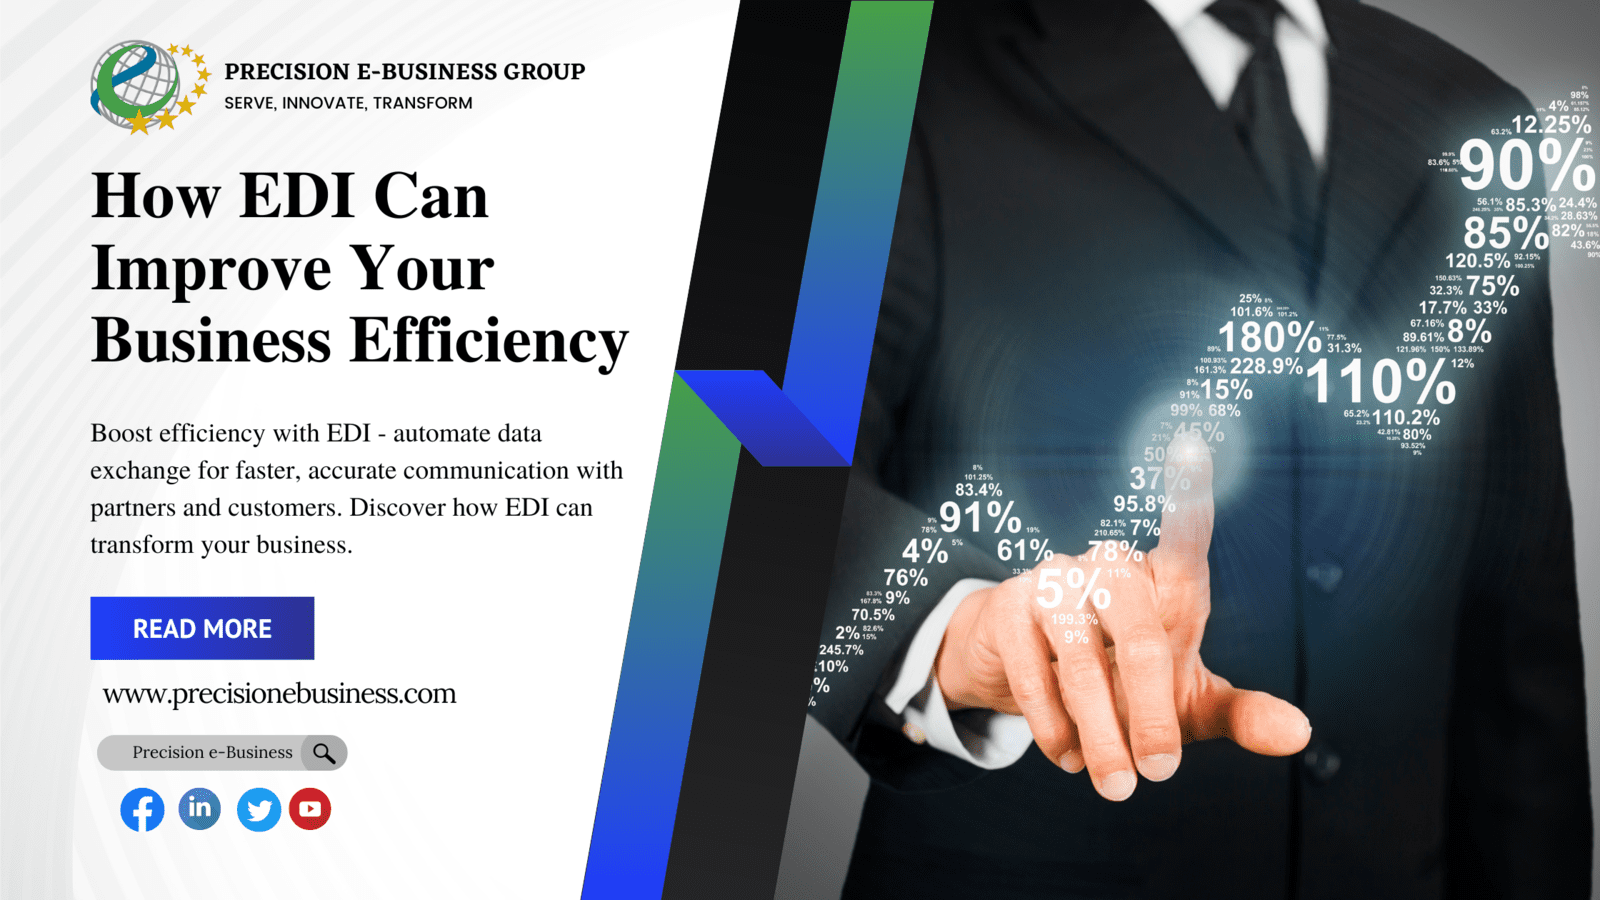 How EDI Can Improve Your Business Efficiency